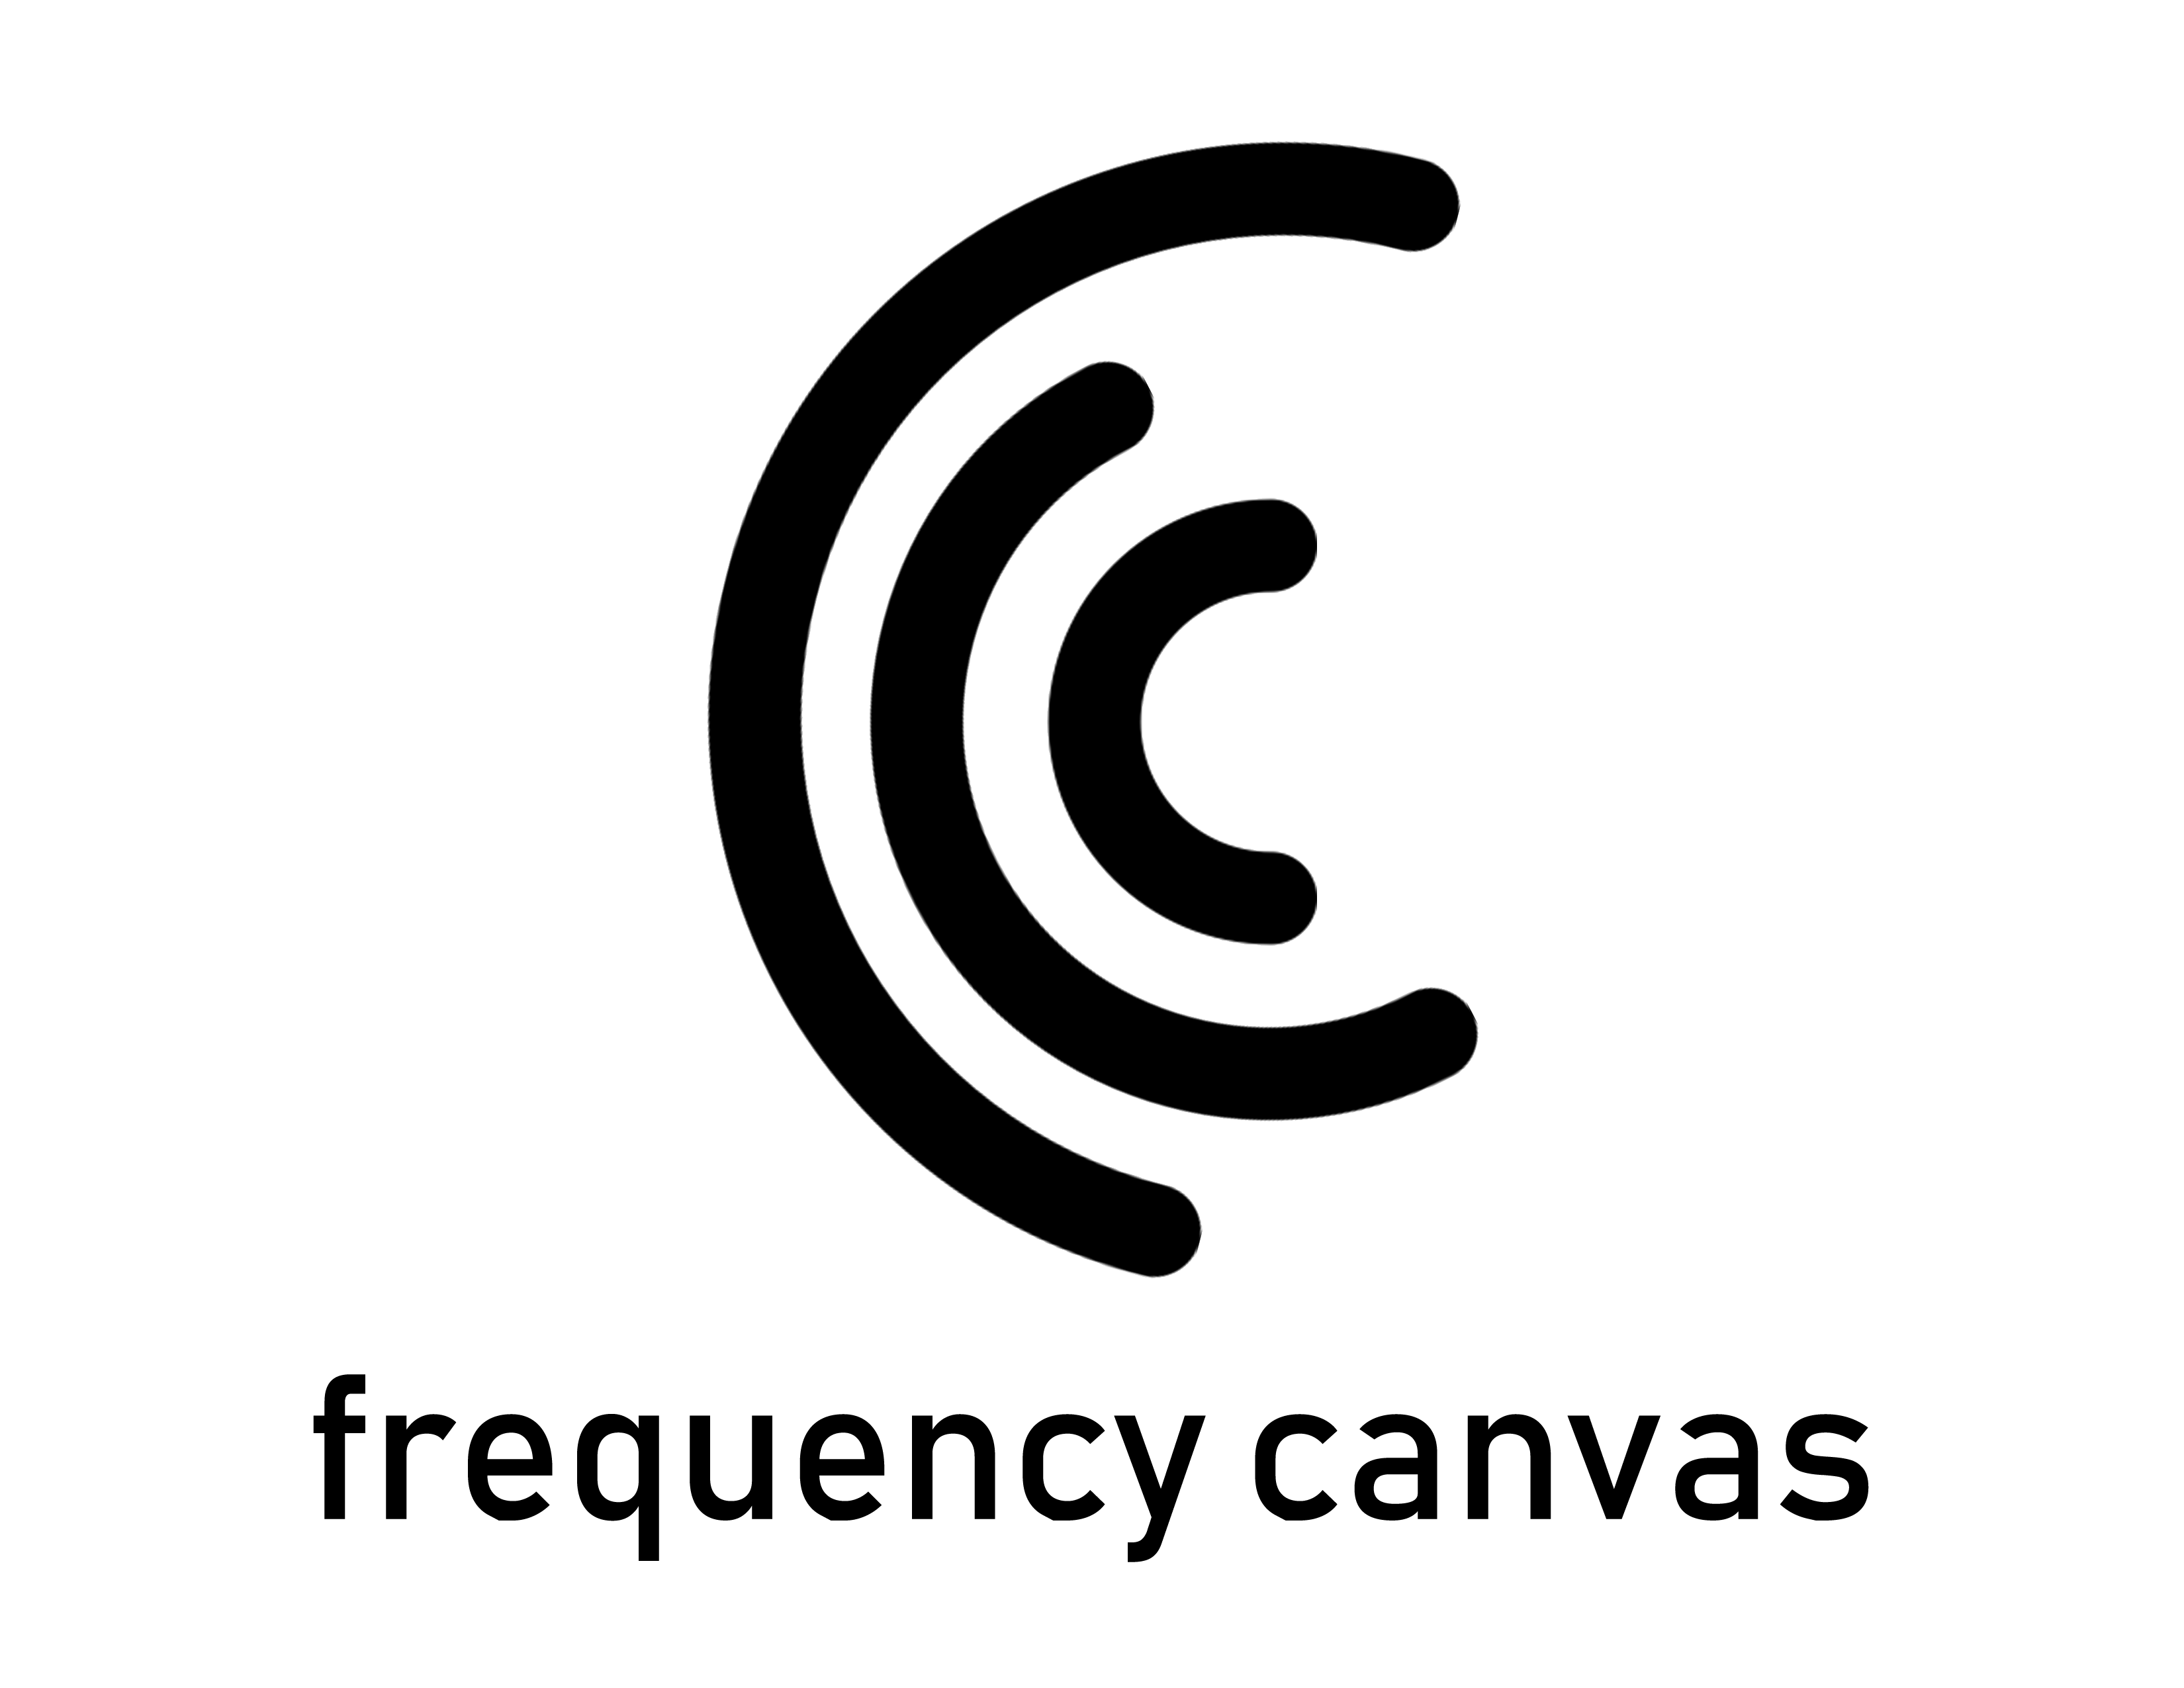 FREQUENCY CANVAS